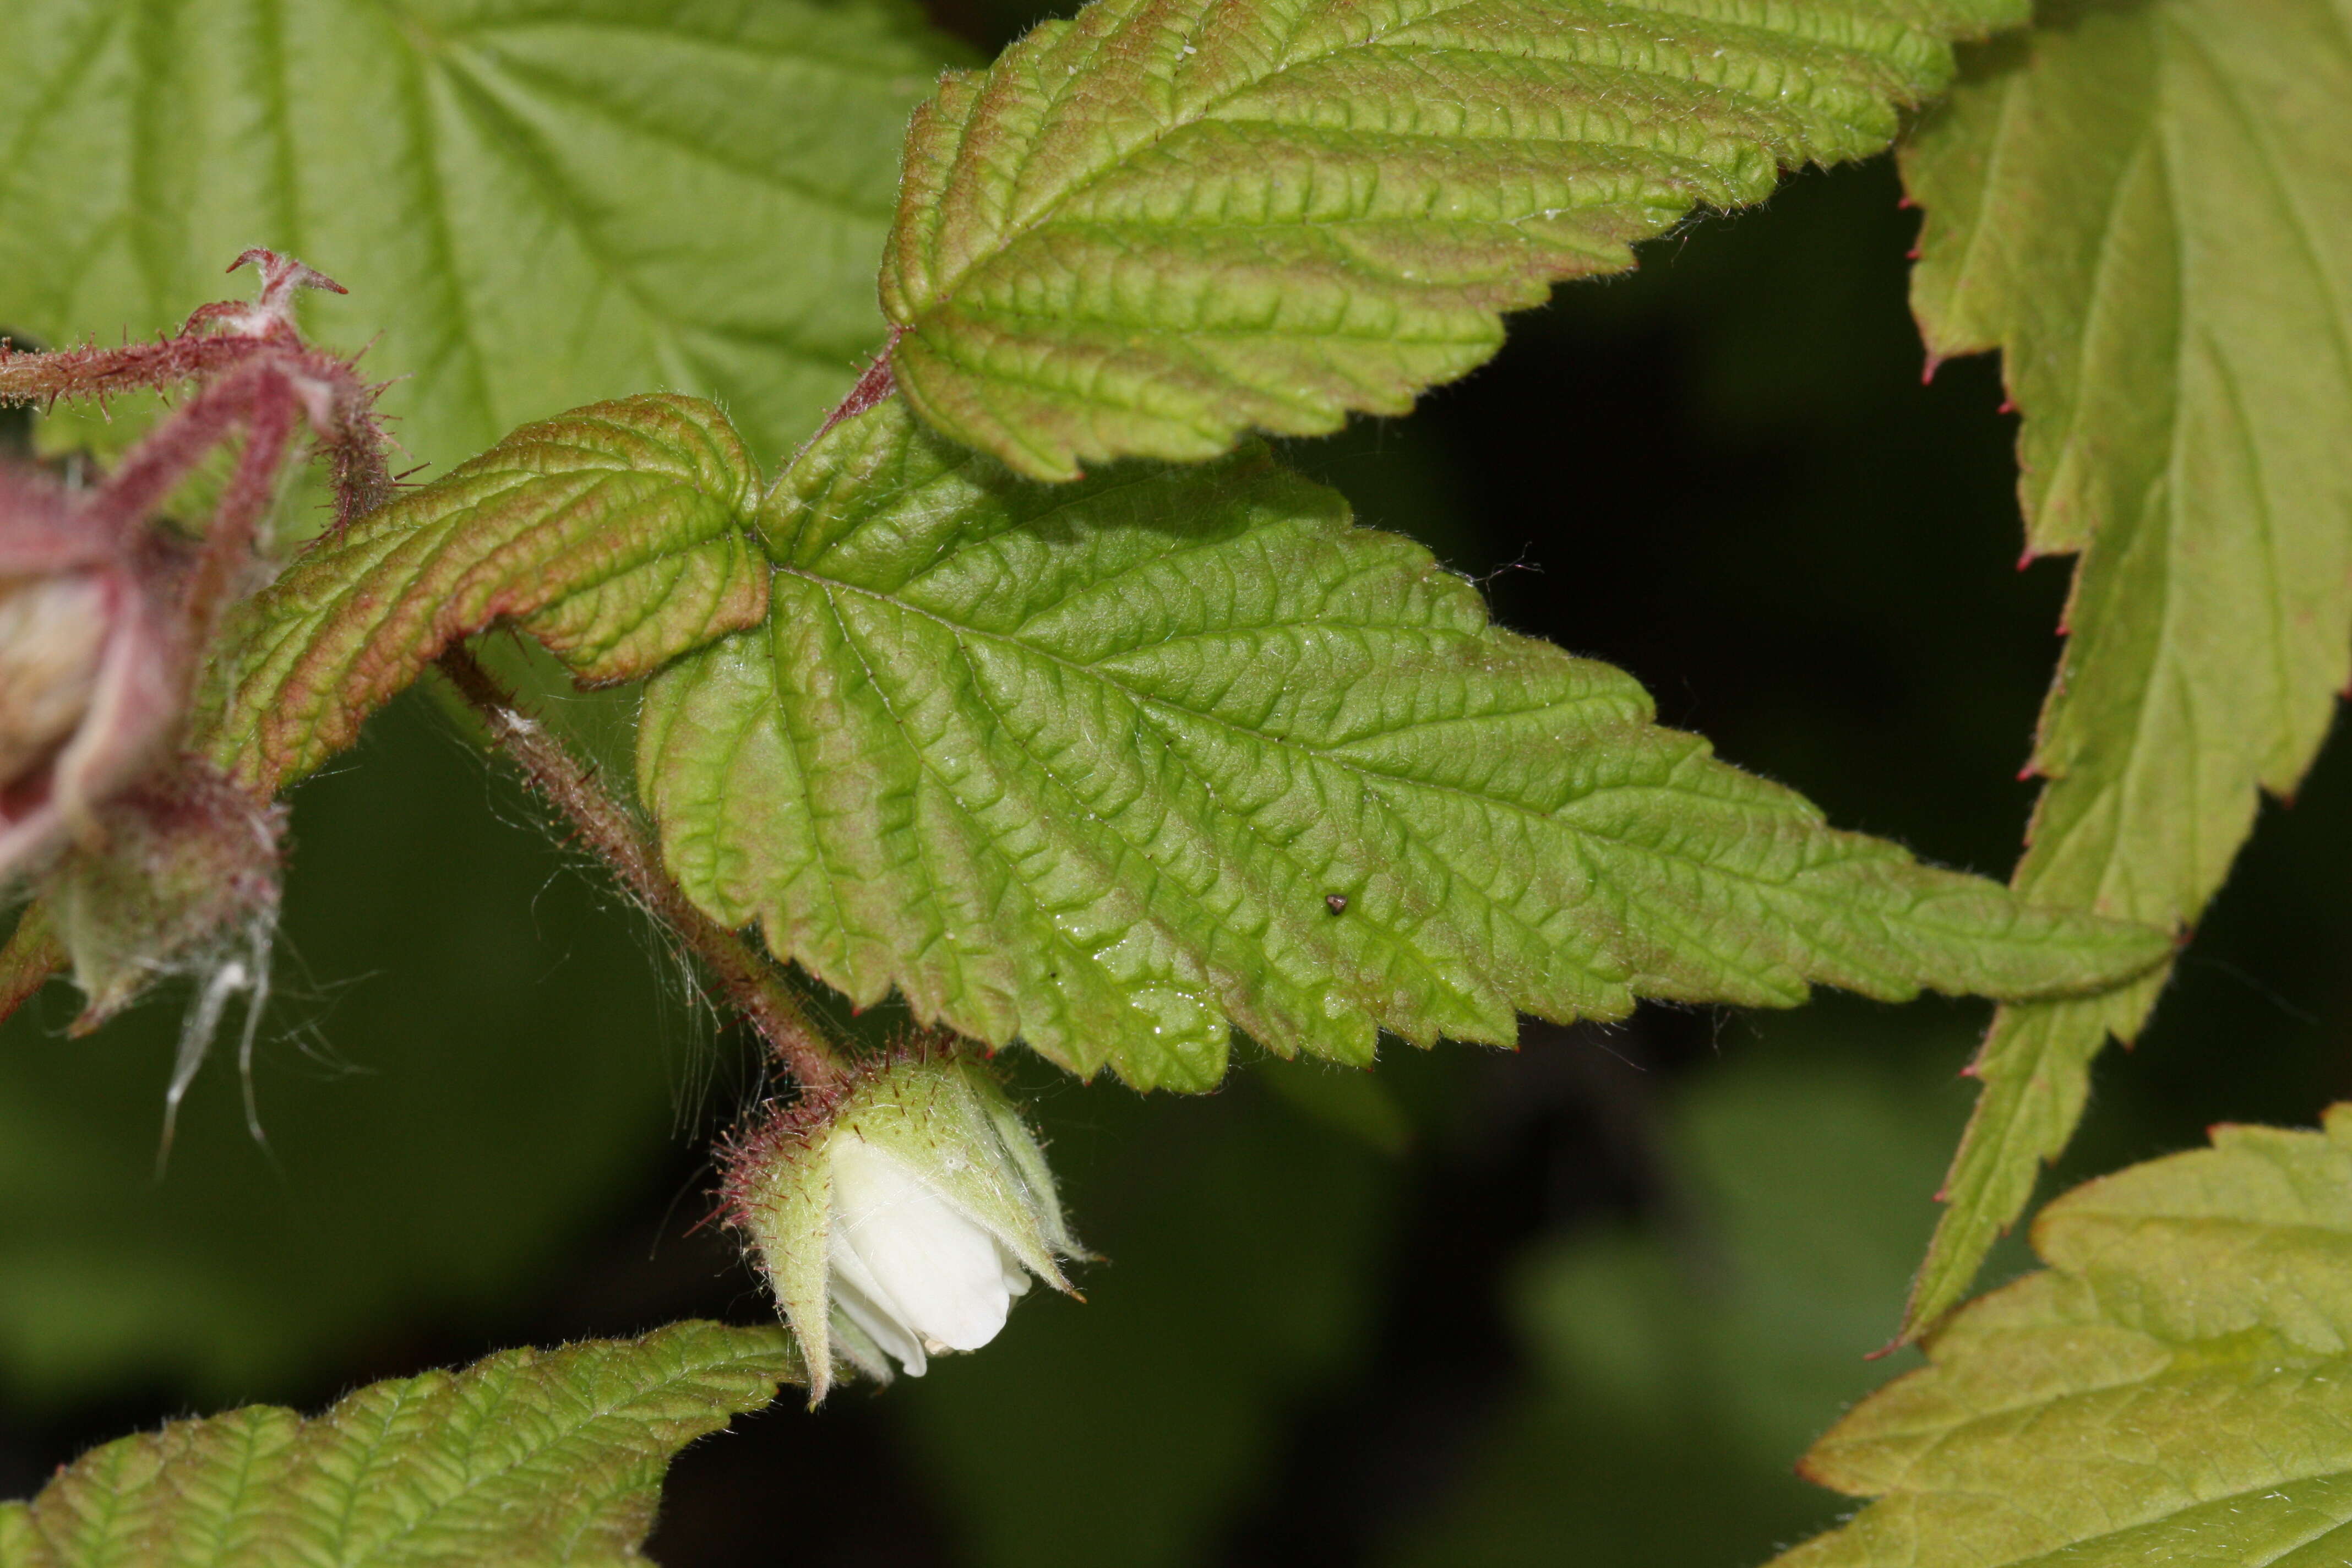 Image of grayleaf red raspberry